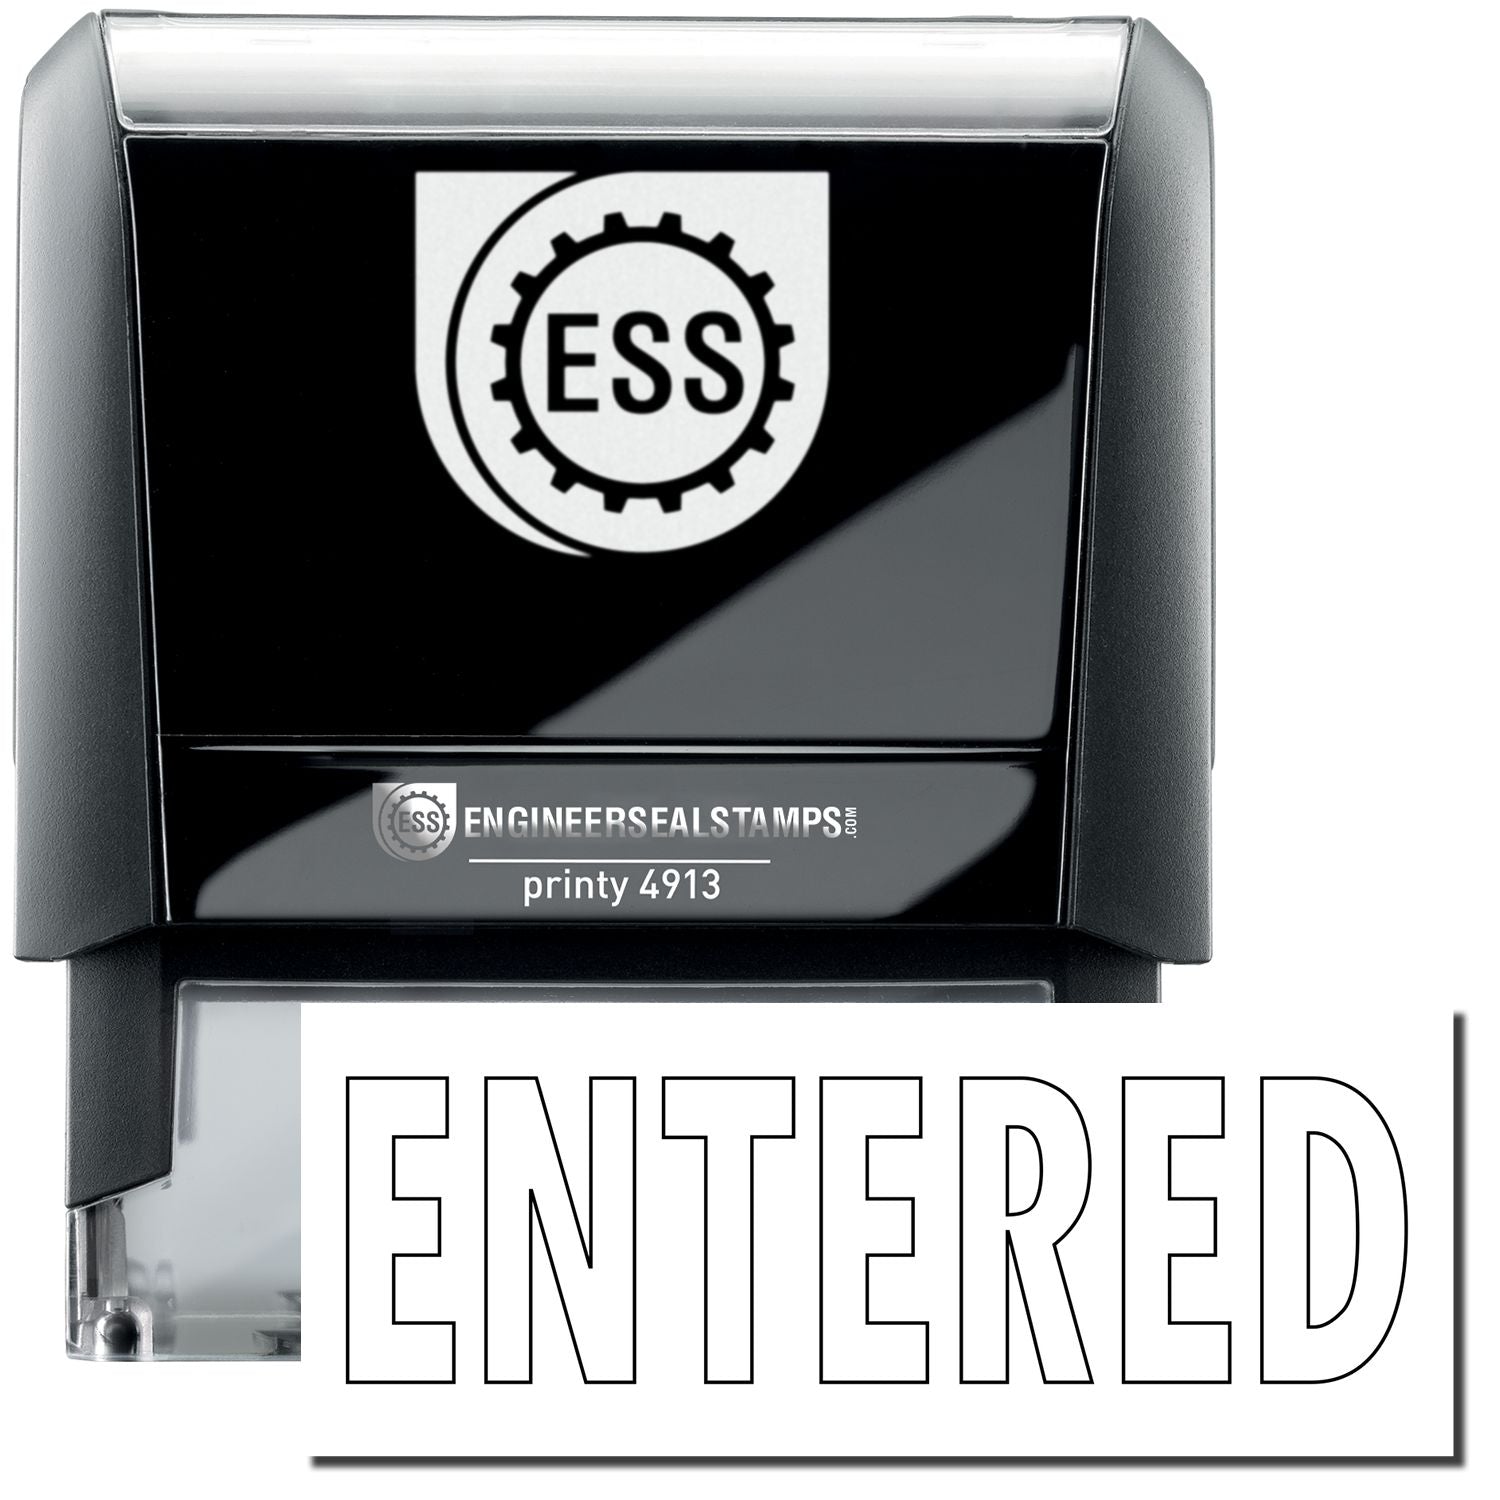 A self-inking stamp with a stamped image showing how the text "ENTERED" in a large outline font is displayed by it.